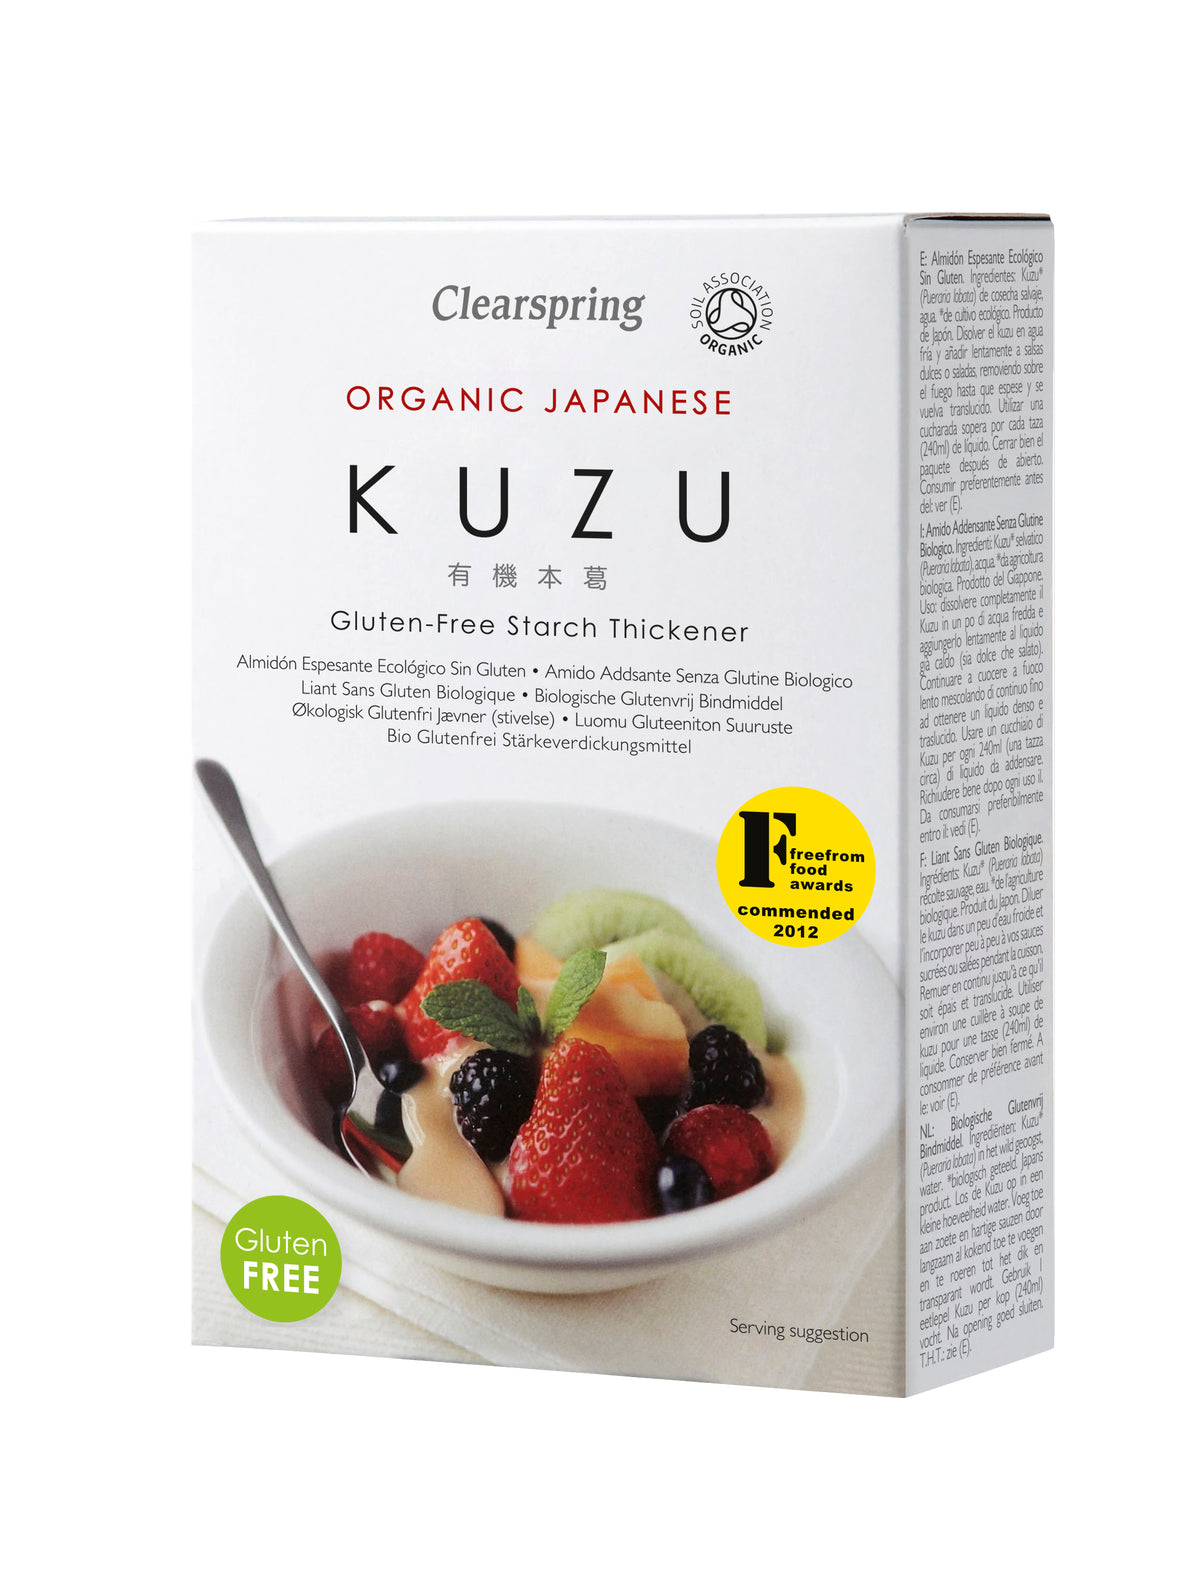 Organic Japanese Kuzu (125g) | Clearspring | Raw Living UK | Clearspring Organic Kuzu is a superior quality starch thickener with a smooth texture &amp; neutral flavour. Used in traditional Japanese cuisine &amp; confectionery.